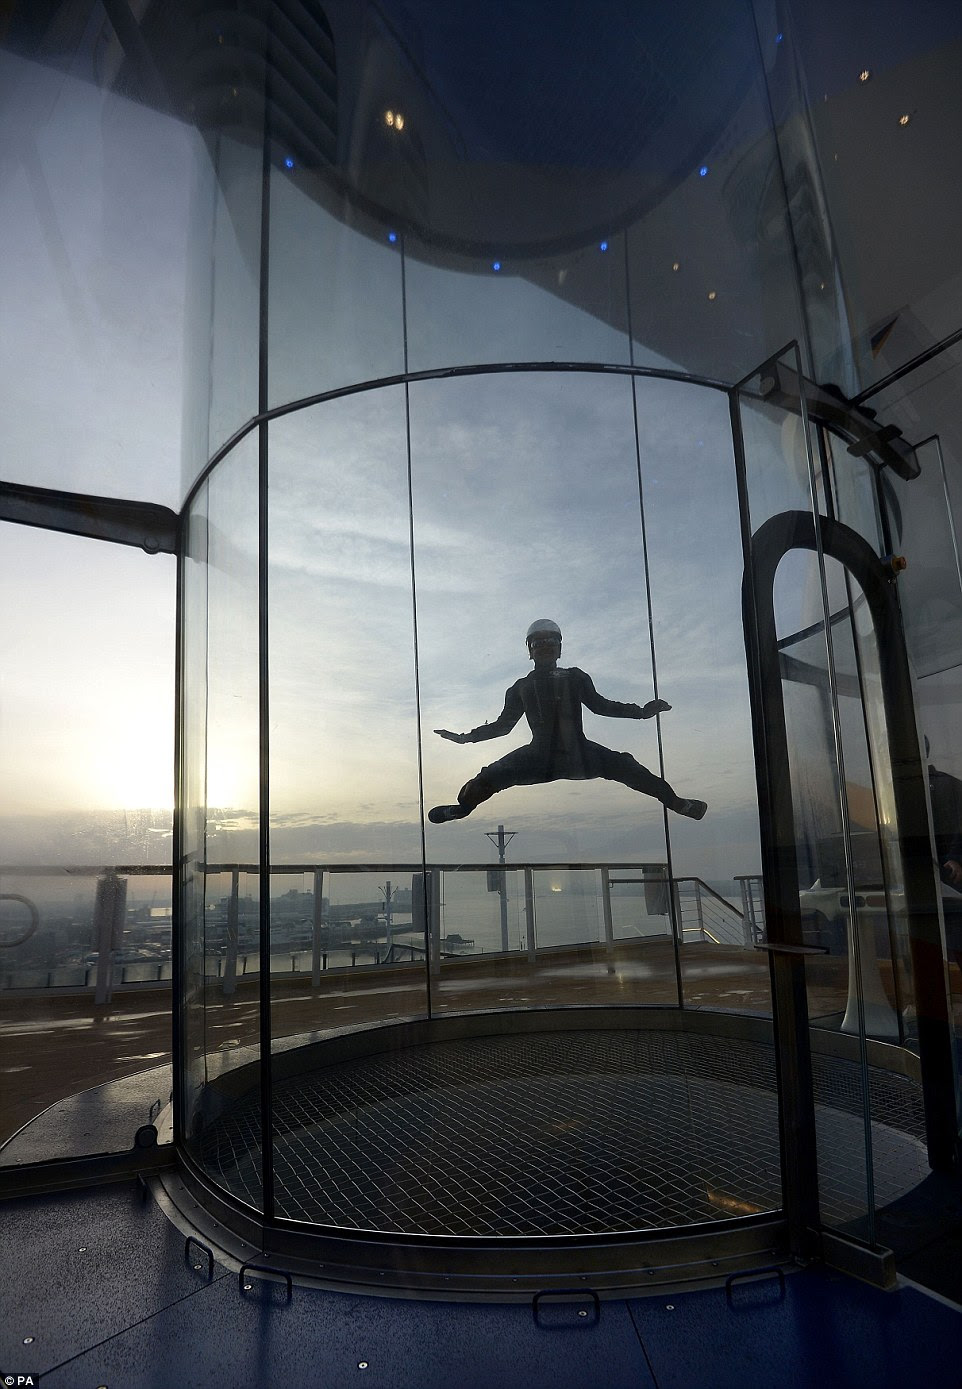 Level 16 boasts iFly - the world's first skydive simulator at sea - as well as North Star, a five-star spa, a surf simulator, a climbing wall, and Seaplex, the largest indoor active space at sea, with gaming, a circus school and bumper cars